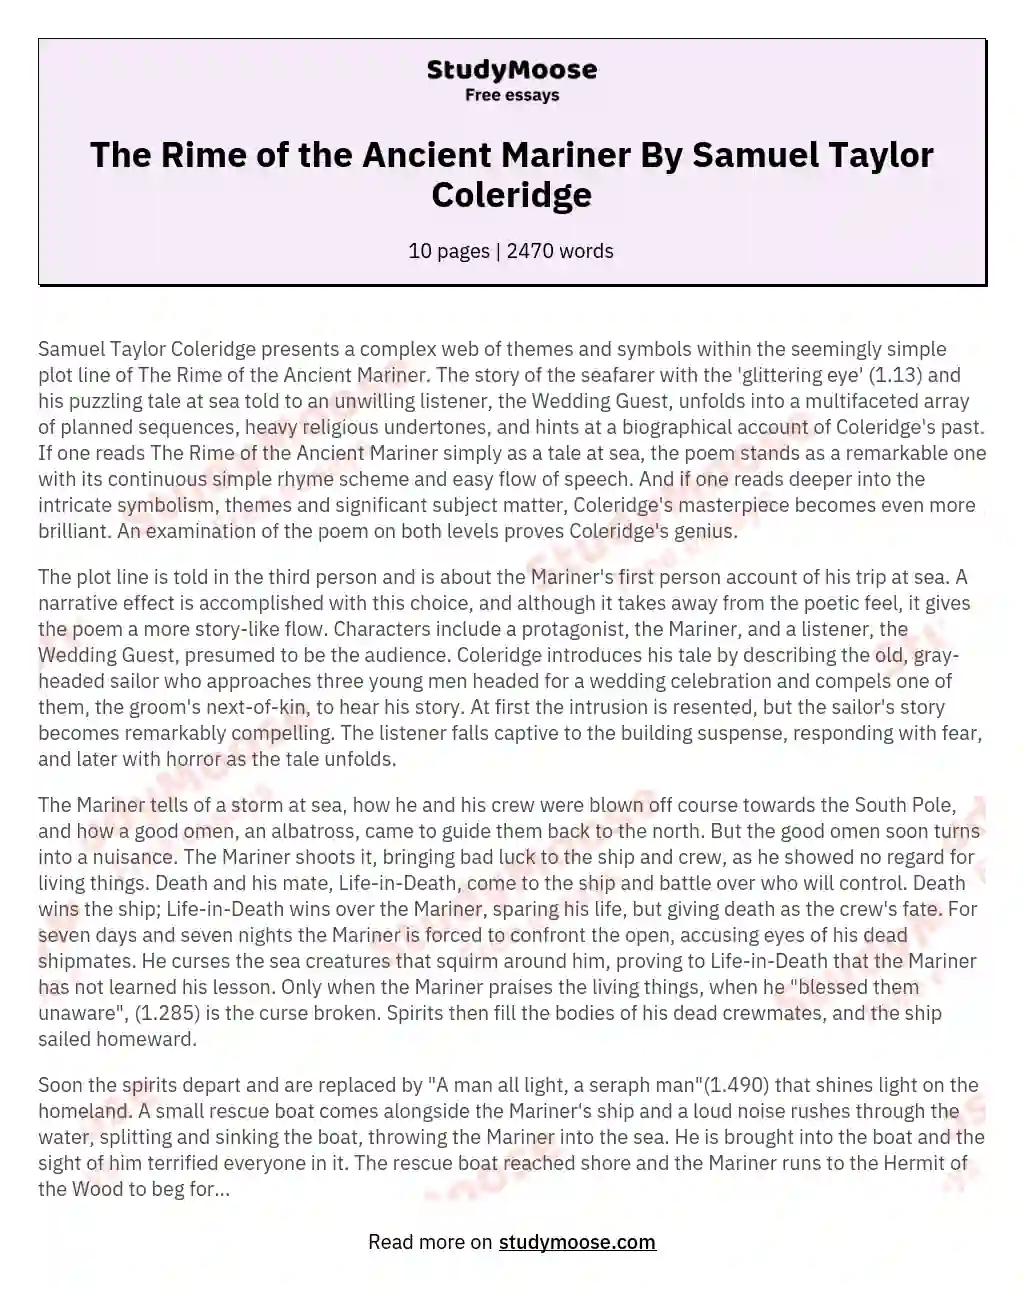 The Rime of the Ancient Mariner By Samuel Taylor Coleridge